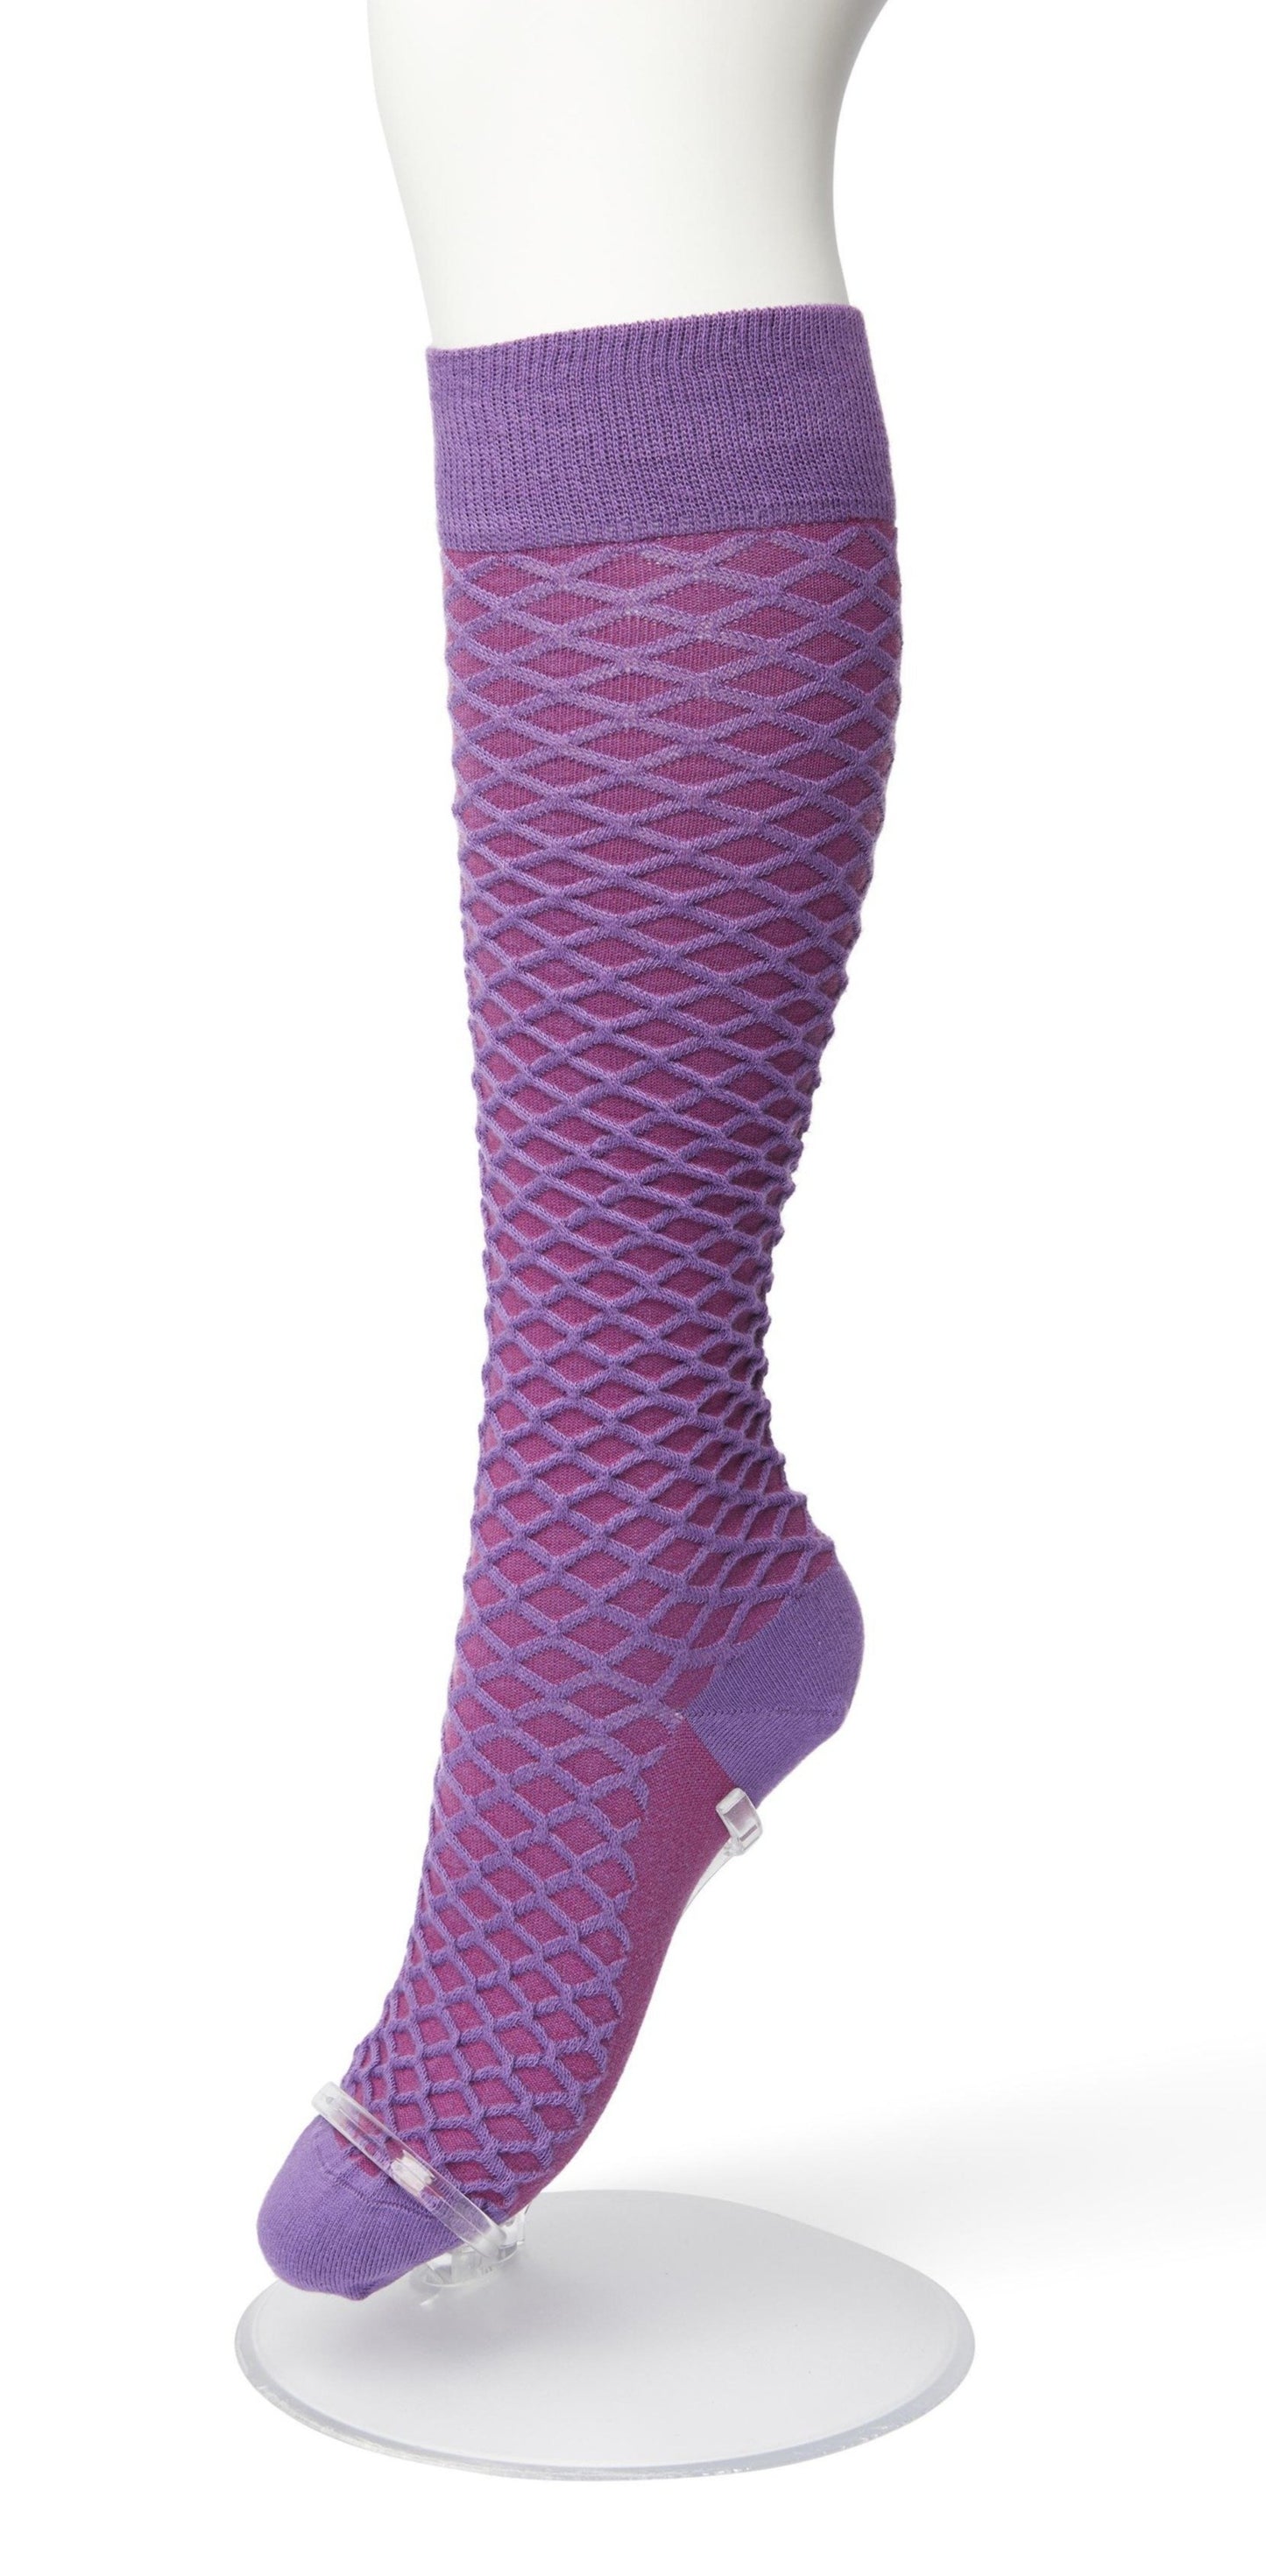 Bonnie Doon BP211506 Cable Knee-highs - Purple (concord grape) soft and warm knitted knee-high socks with a criss-cross diamond textured pattern